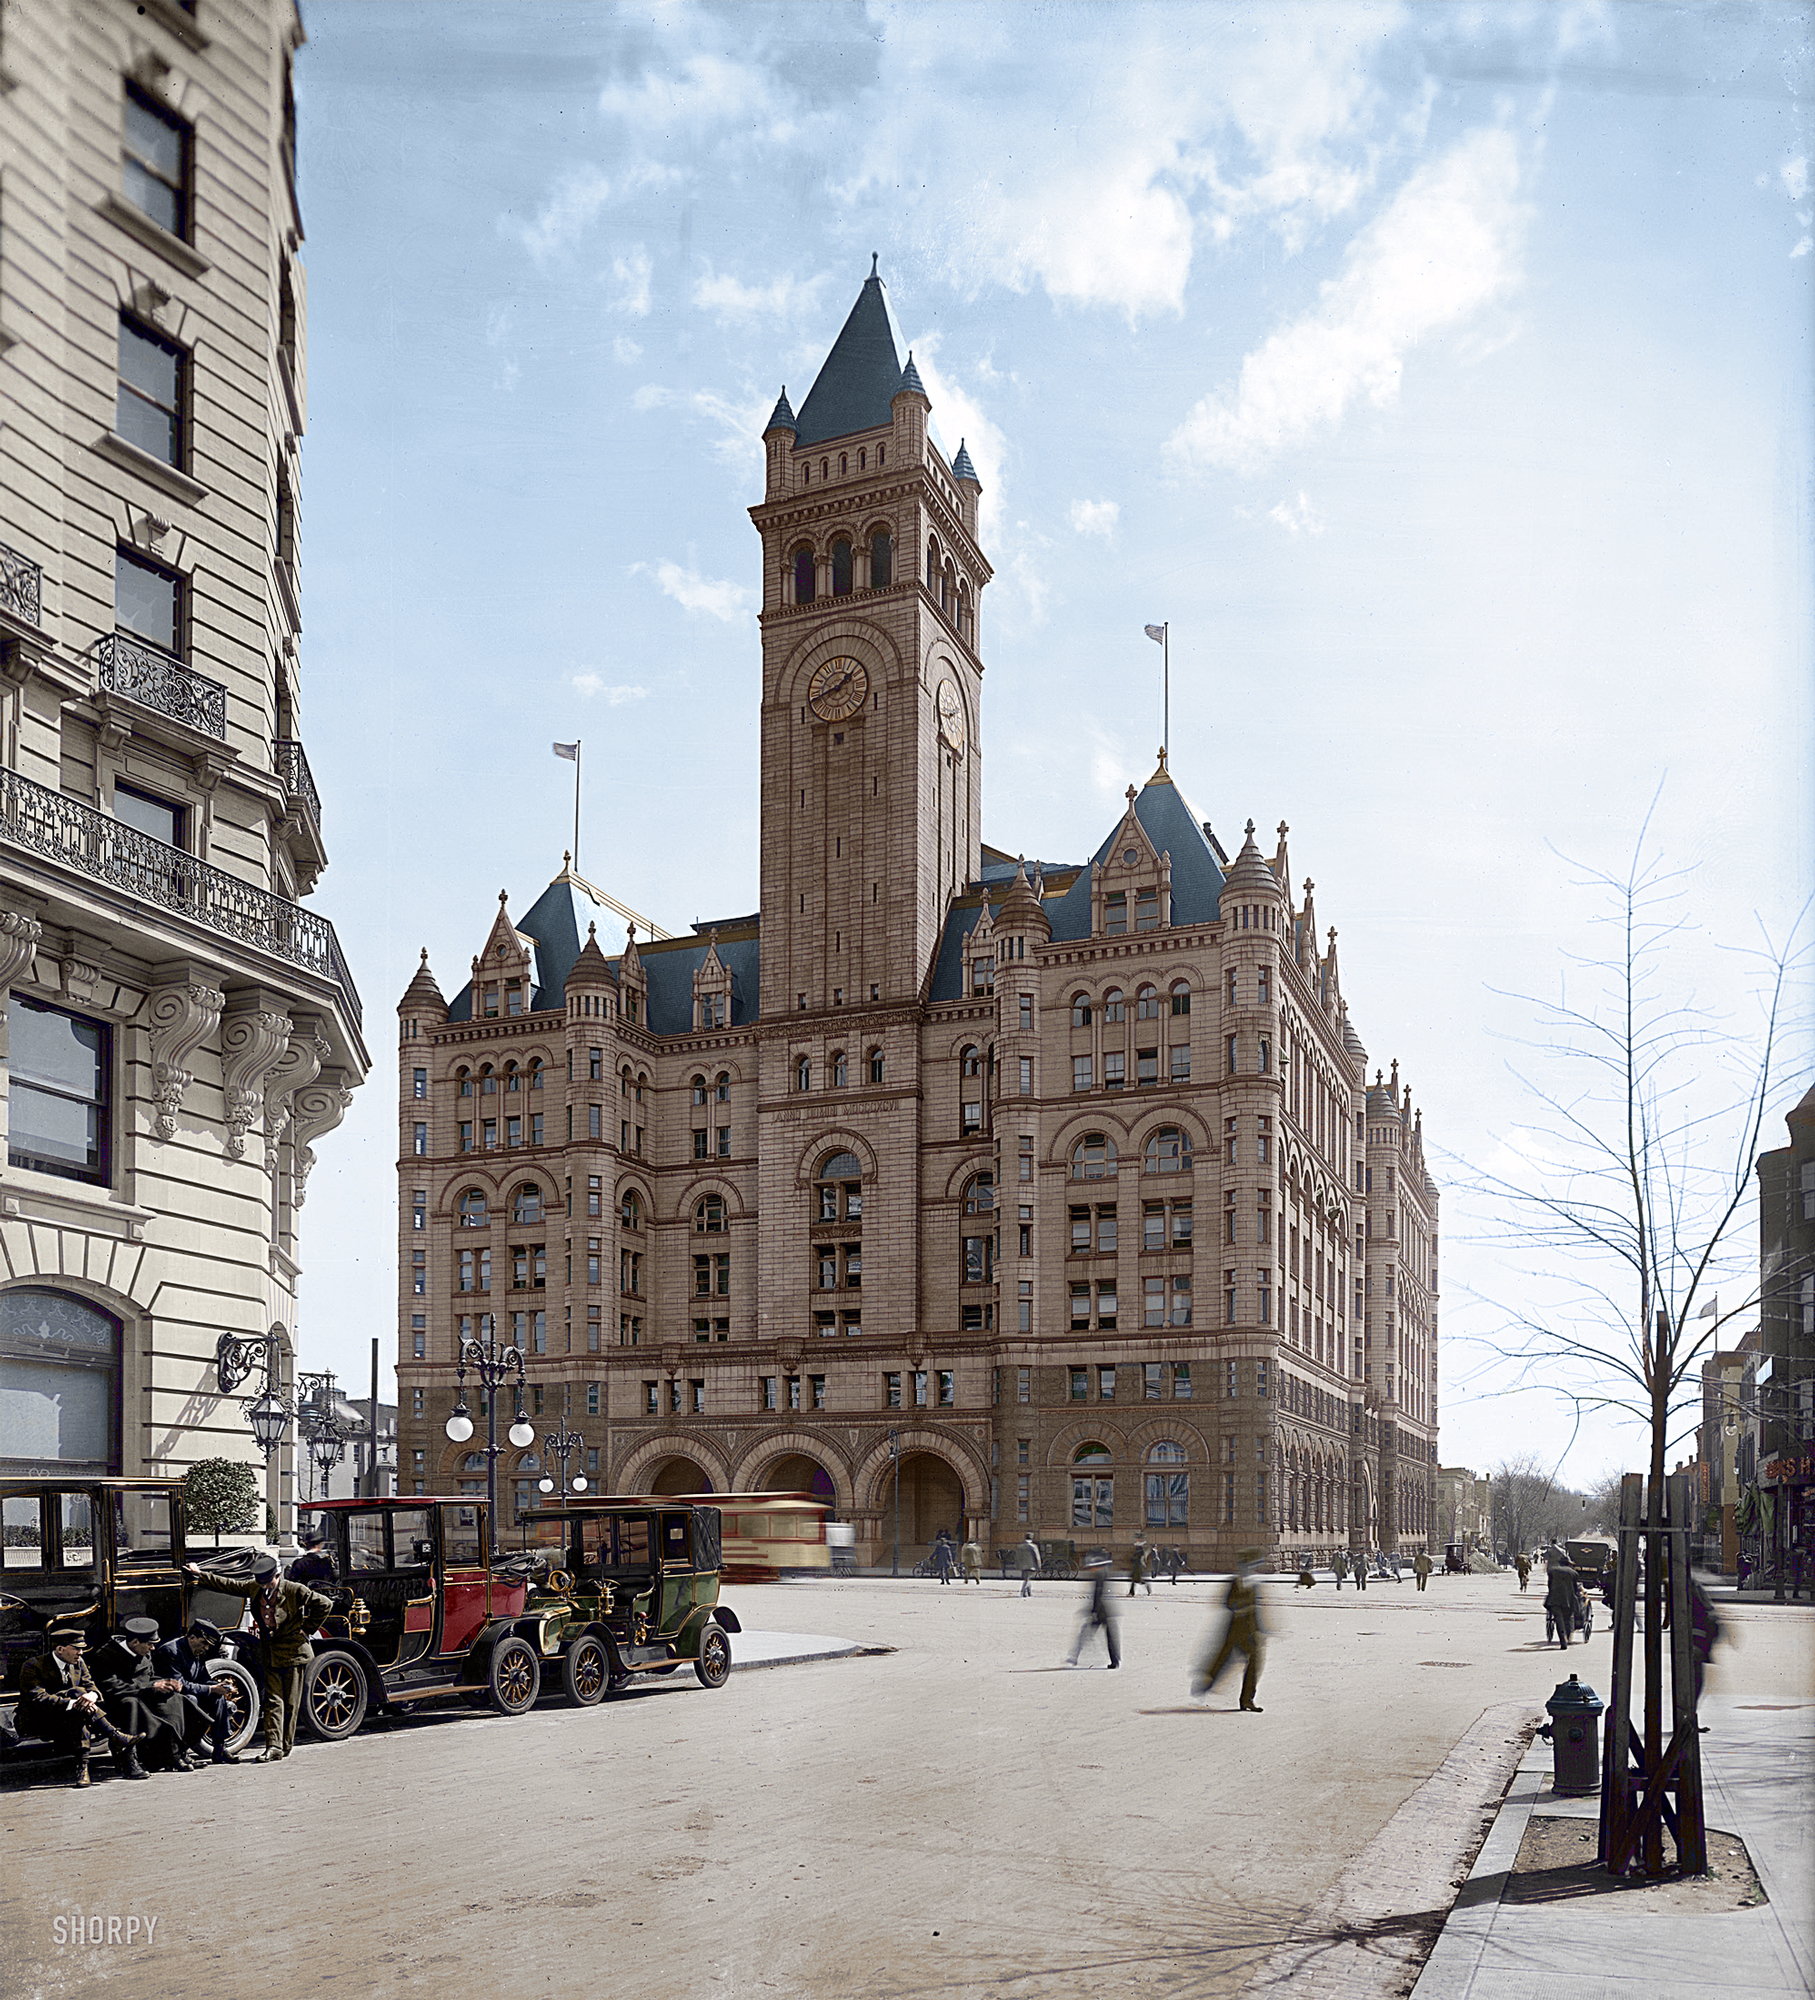 This is a recolor of the Shorpy image here. Thought I'd take a crack at it in anticipation of the Trump Hotel renovation when he stamps his brand on it. I'm hopeful Trump will maintain the integrity and look of the one-of-a-kind exterior. It is after-all on the National Register of Historic places. I used a 1911 Renault Parisian taxi (the green car) and the 1910 Ford Model T Limo for the burgundy car. The black one looks larger more elegant Model T Limo. I found one postcard reference for a regular streetcar, not the mail car referenced in a previous comment on the original image.  View full size.